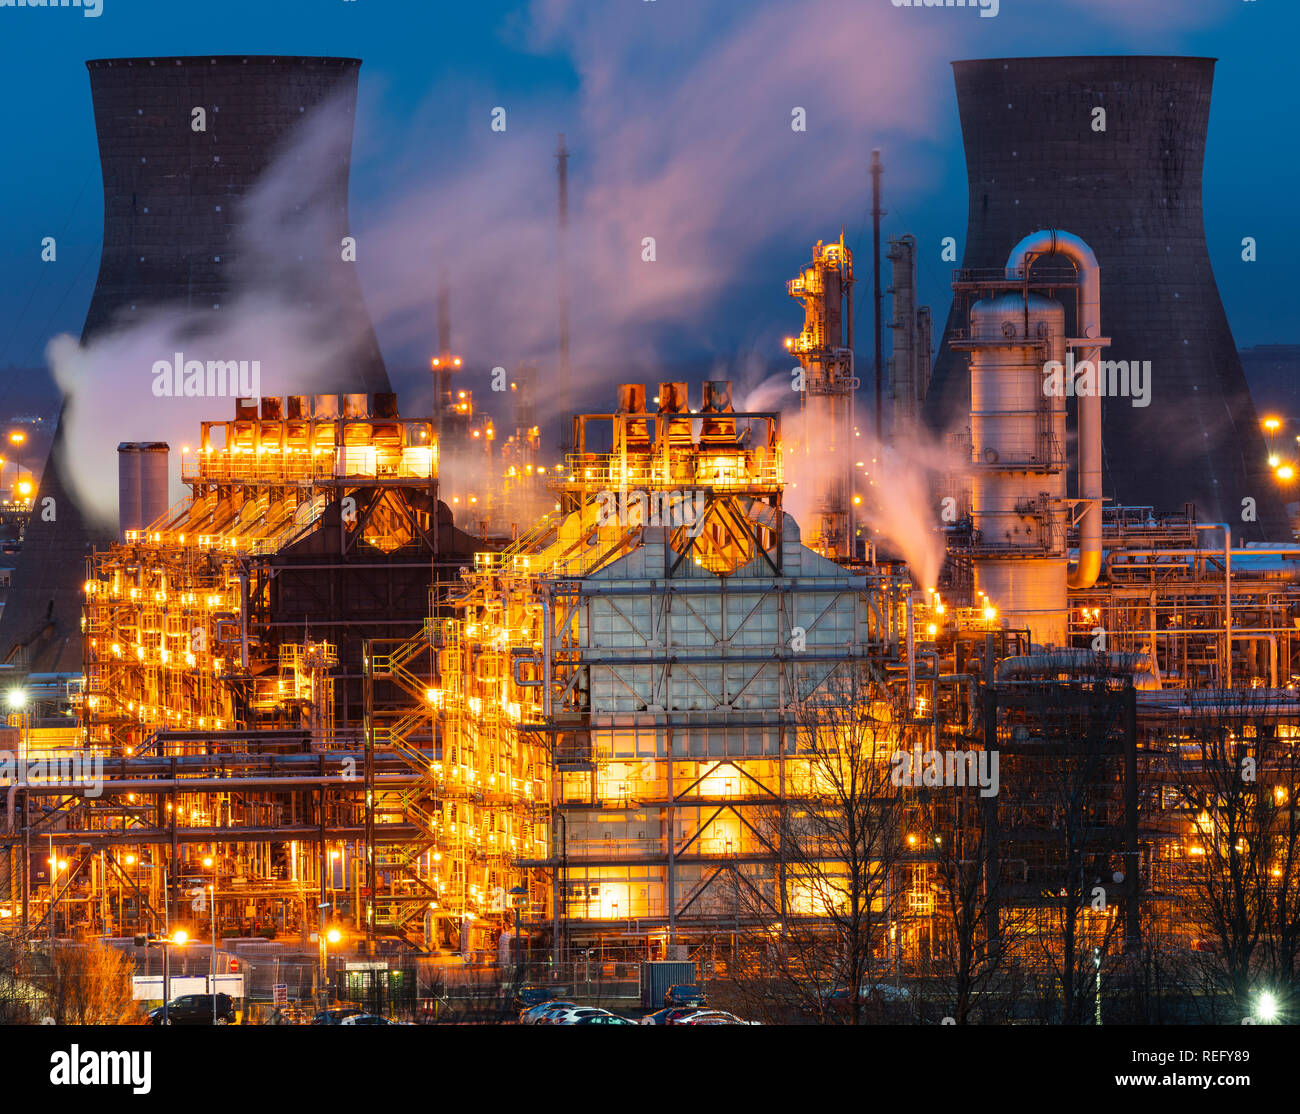 Night view of INEOS Grangemouth petrochemical plant and refinery in Scotland, UK Stock Photo